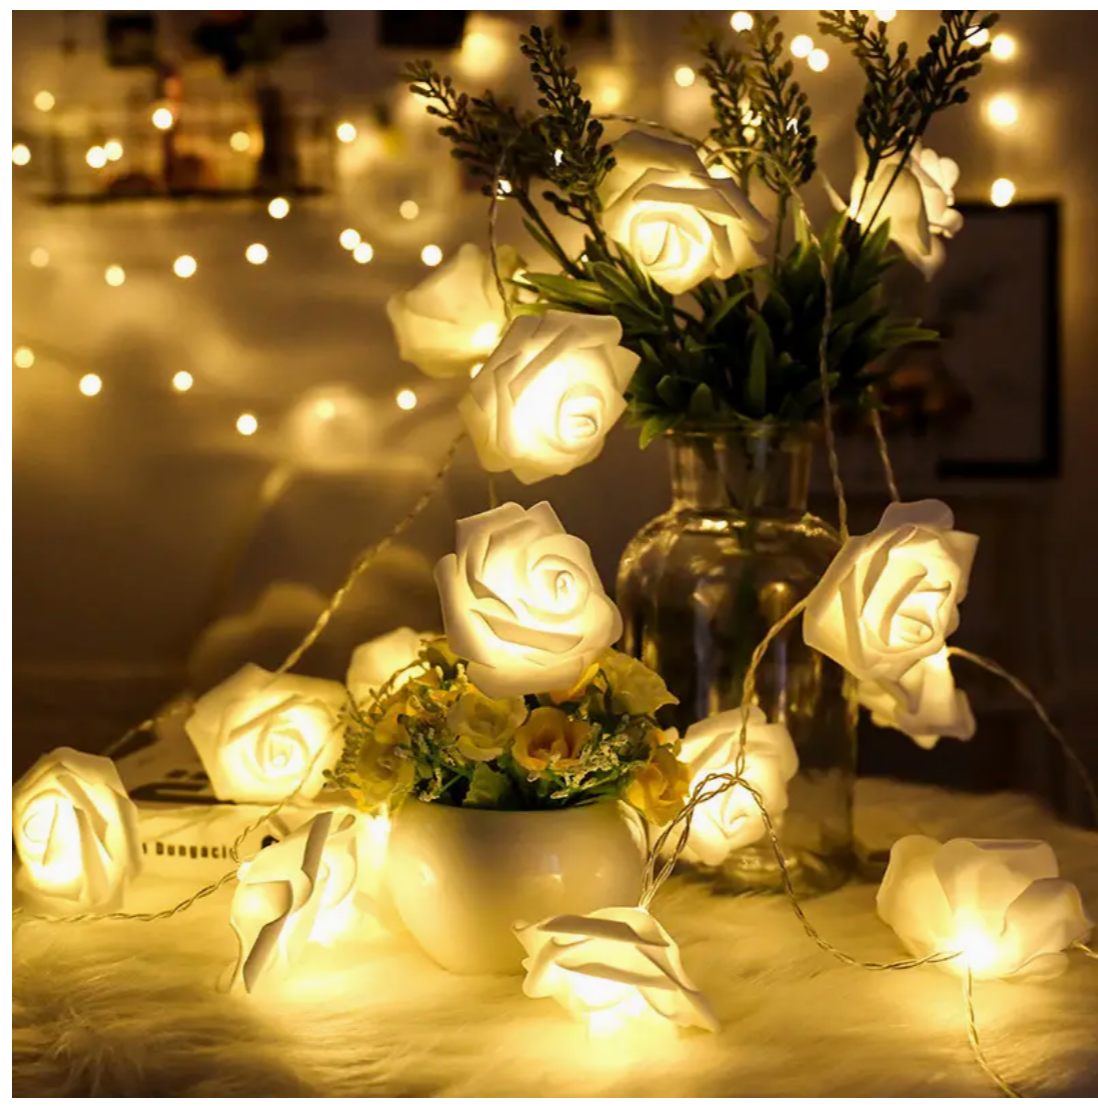 Glowing Romance: LED Rose String Lights for Magical Moments - Perfect for Valentine's Day, Weddings, and Year-Round Celebrations!